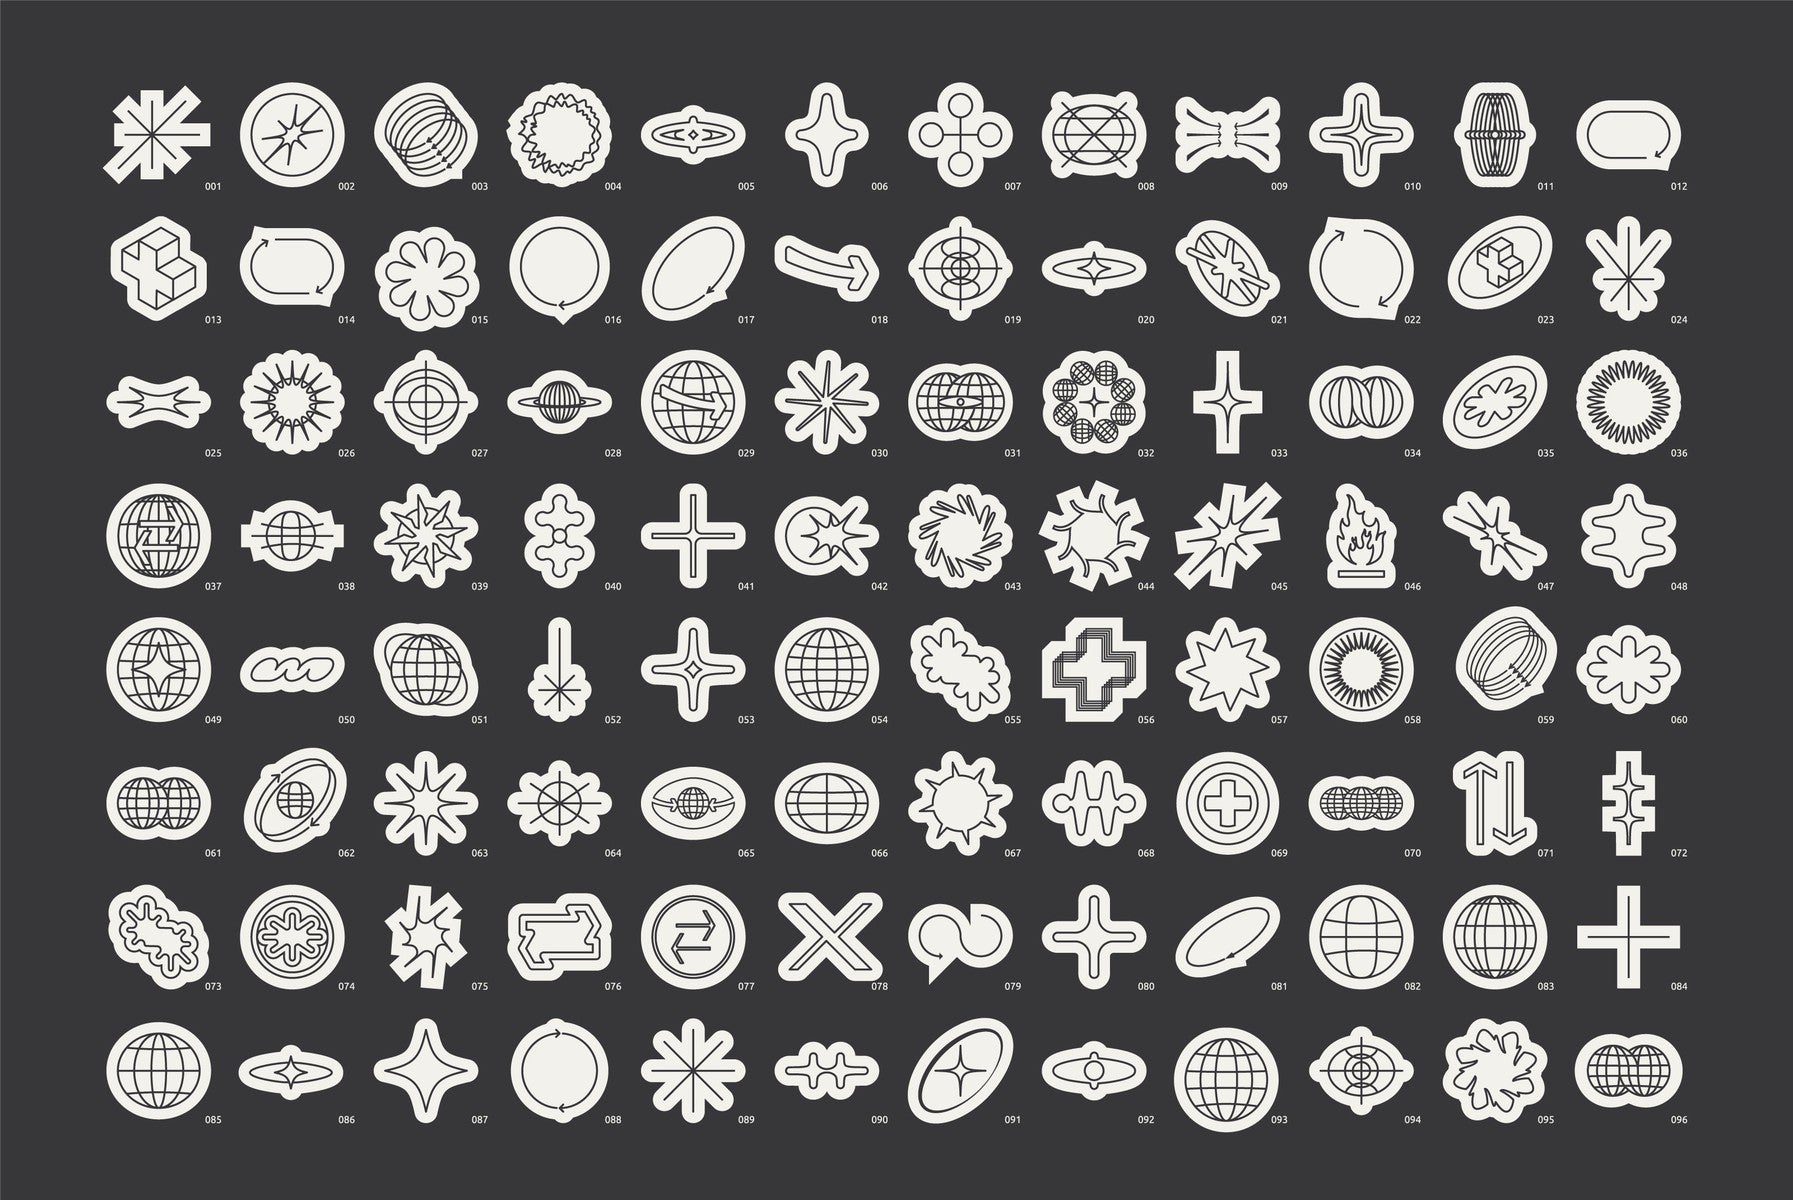 96 Linear Vector Shapes - Part 1